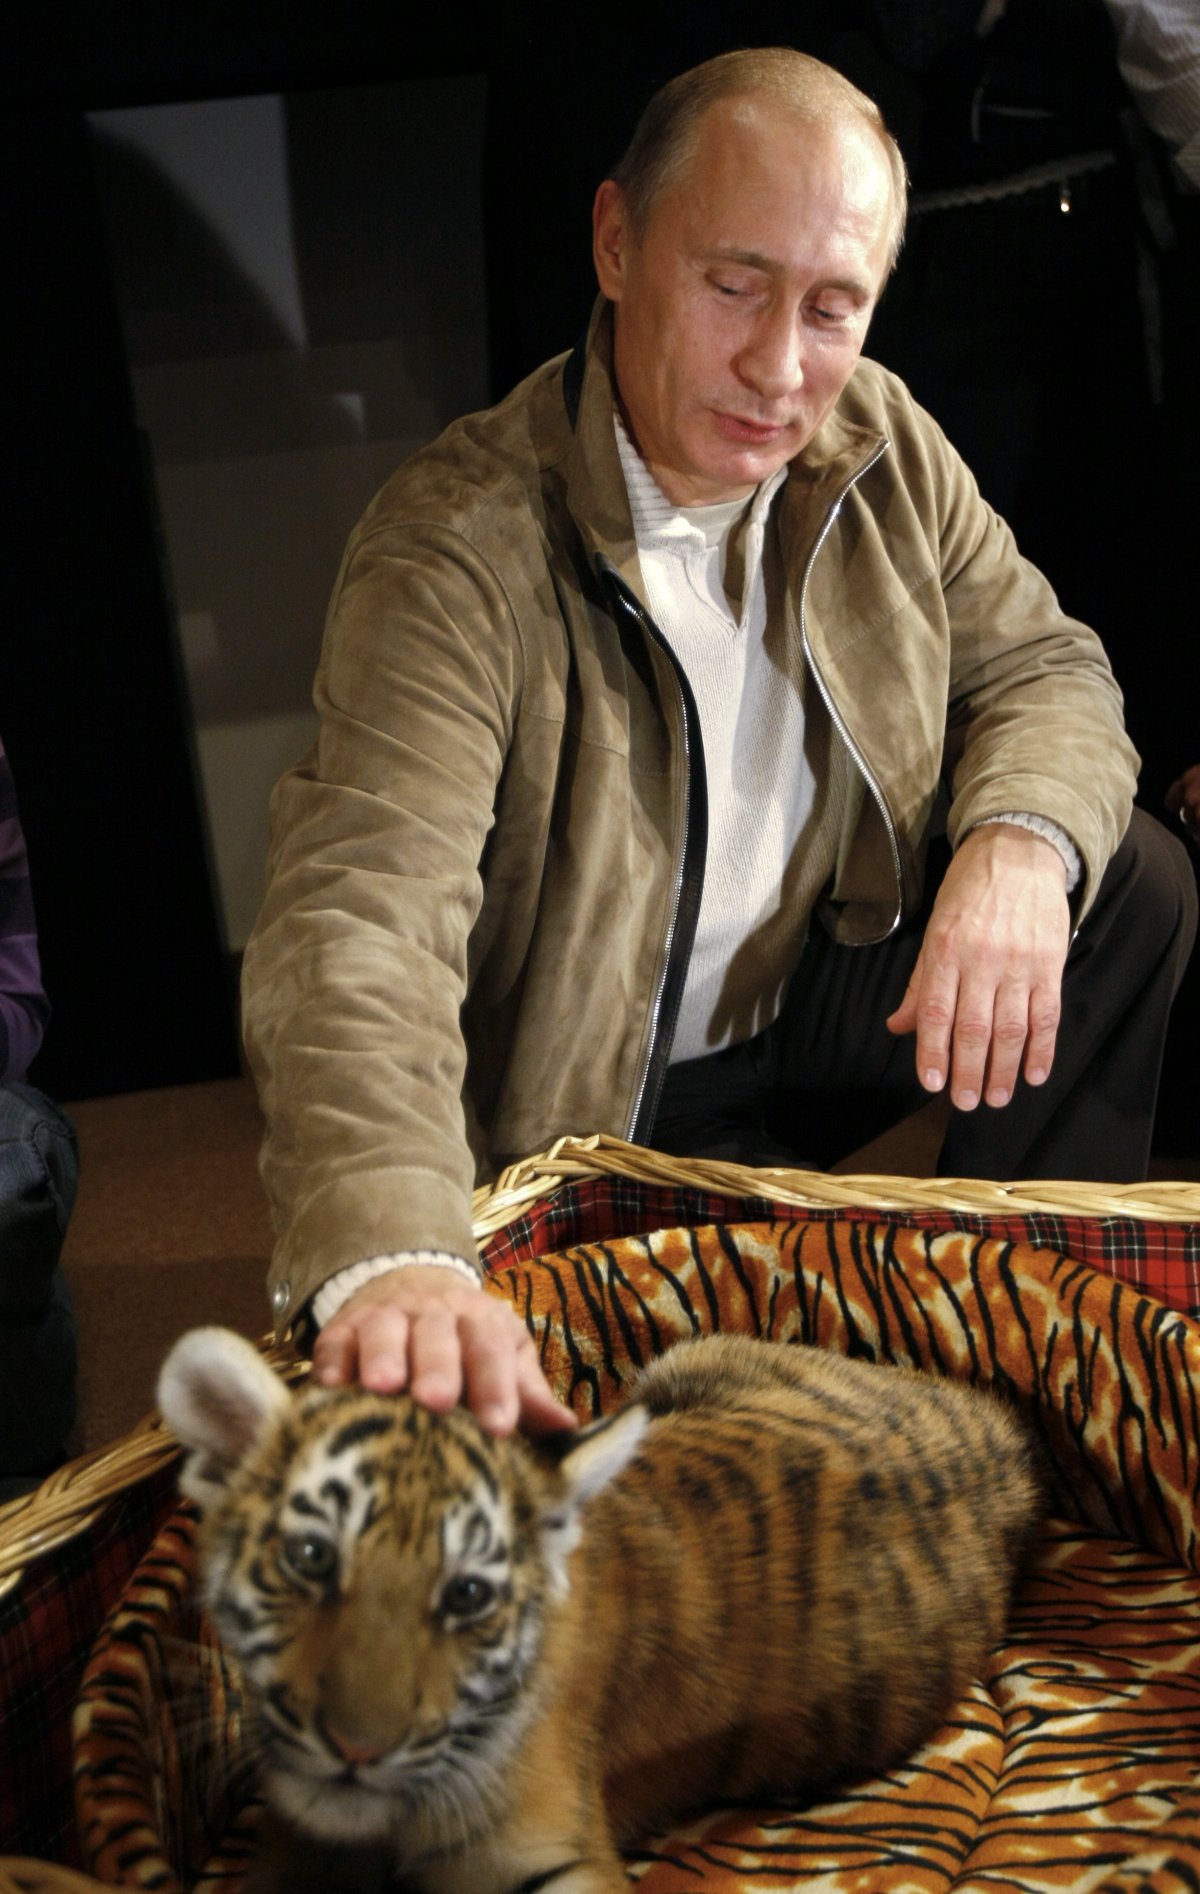 theres-also-a-softer-side-to-the-russian-president-here-putin-strokes-a-two-month-old-tiger-cub-he-received-as-a-birthday-present-at-his-novo-ogaryovo-residence-outside-of-moscow-it-will-soon-go-to-a-zoo